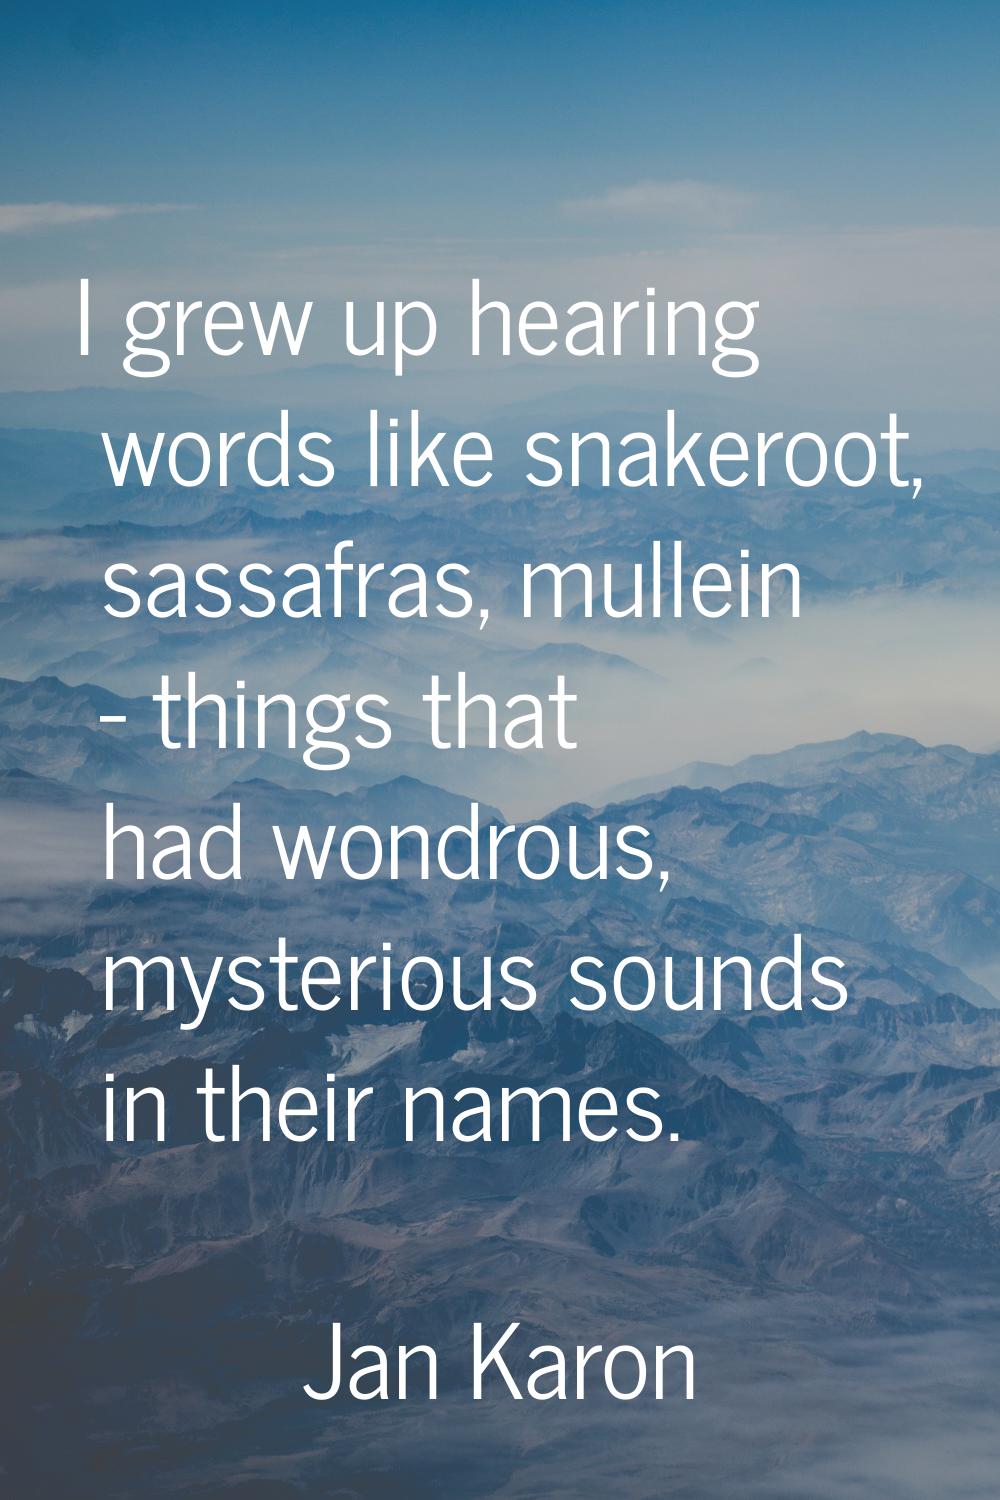 I grew up hearing words like snakeroot, sassafras, mullein - things that had wondrous, mysterious s